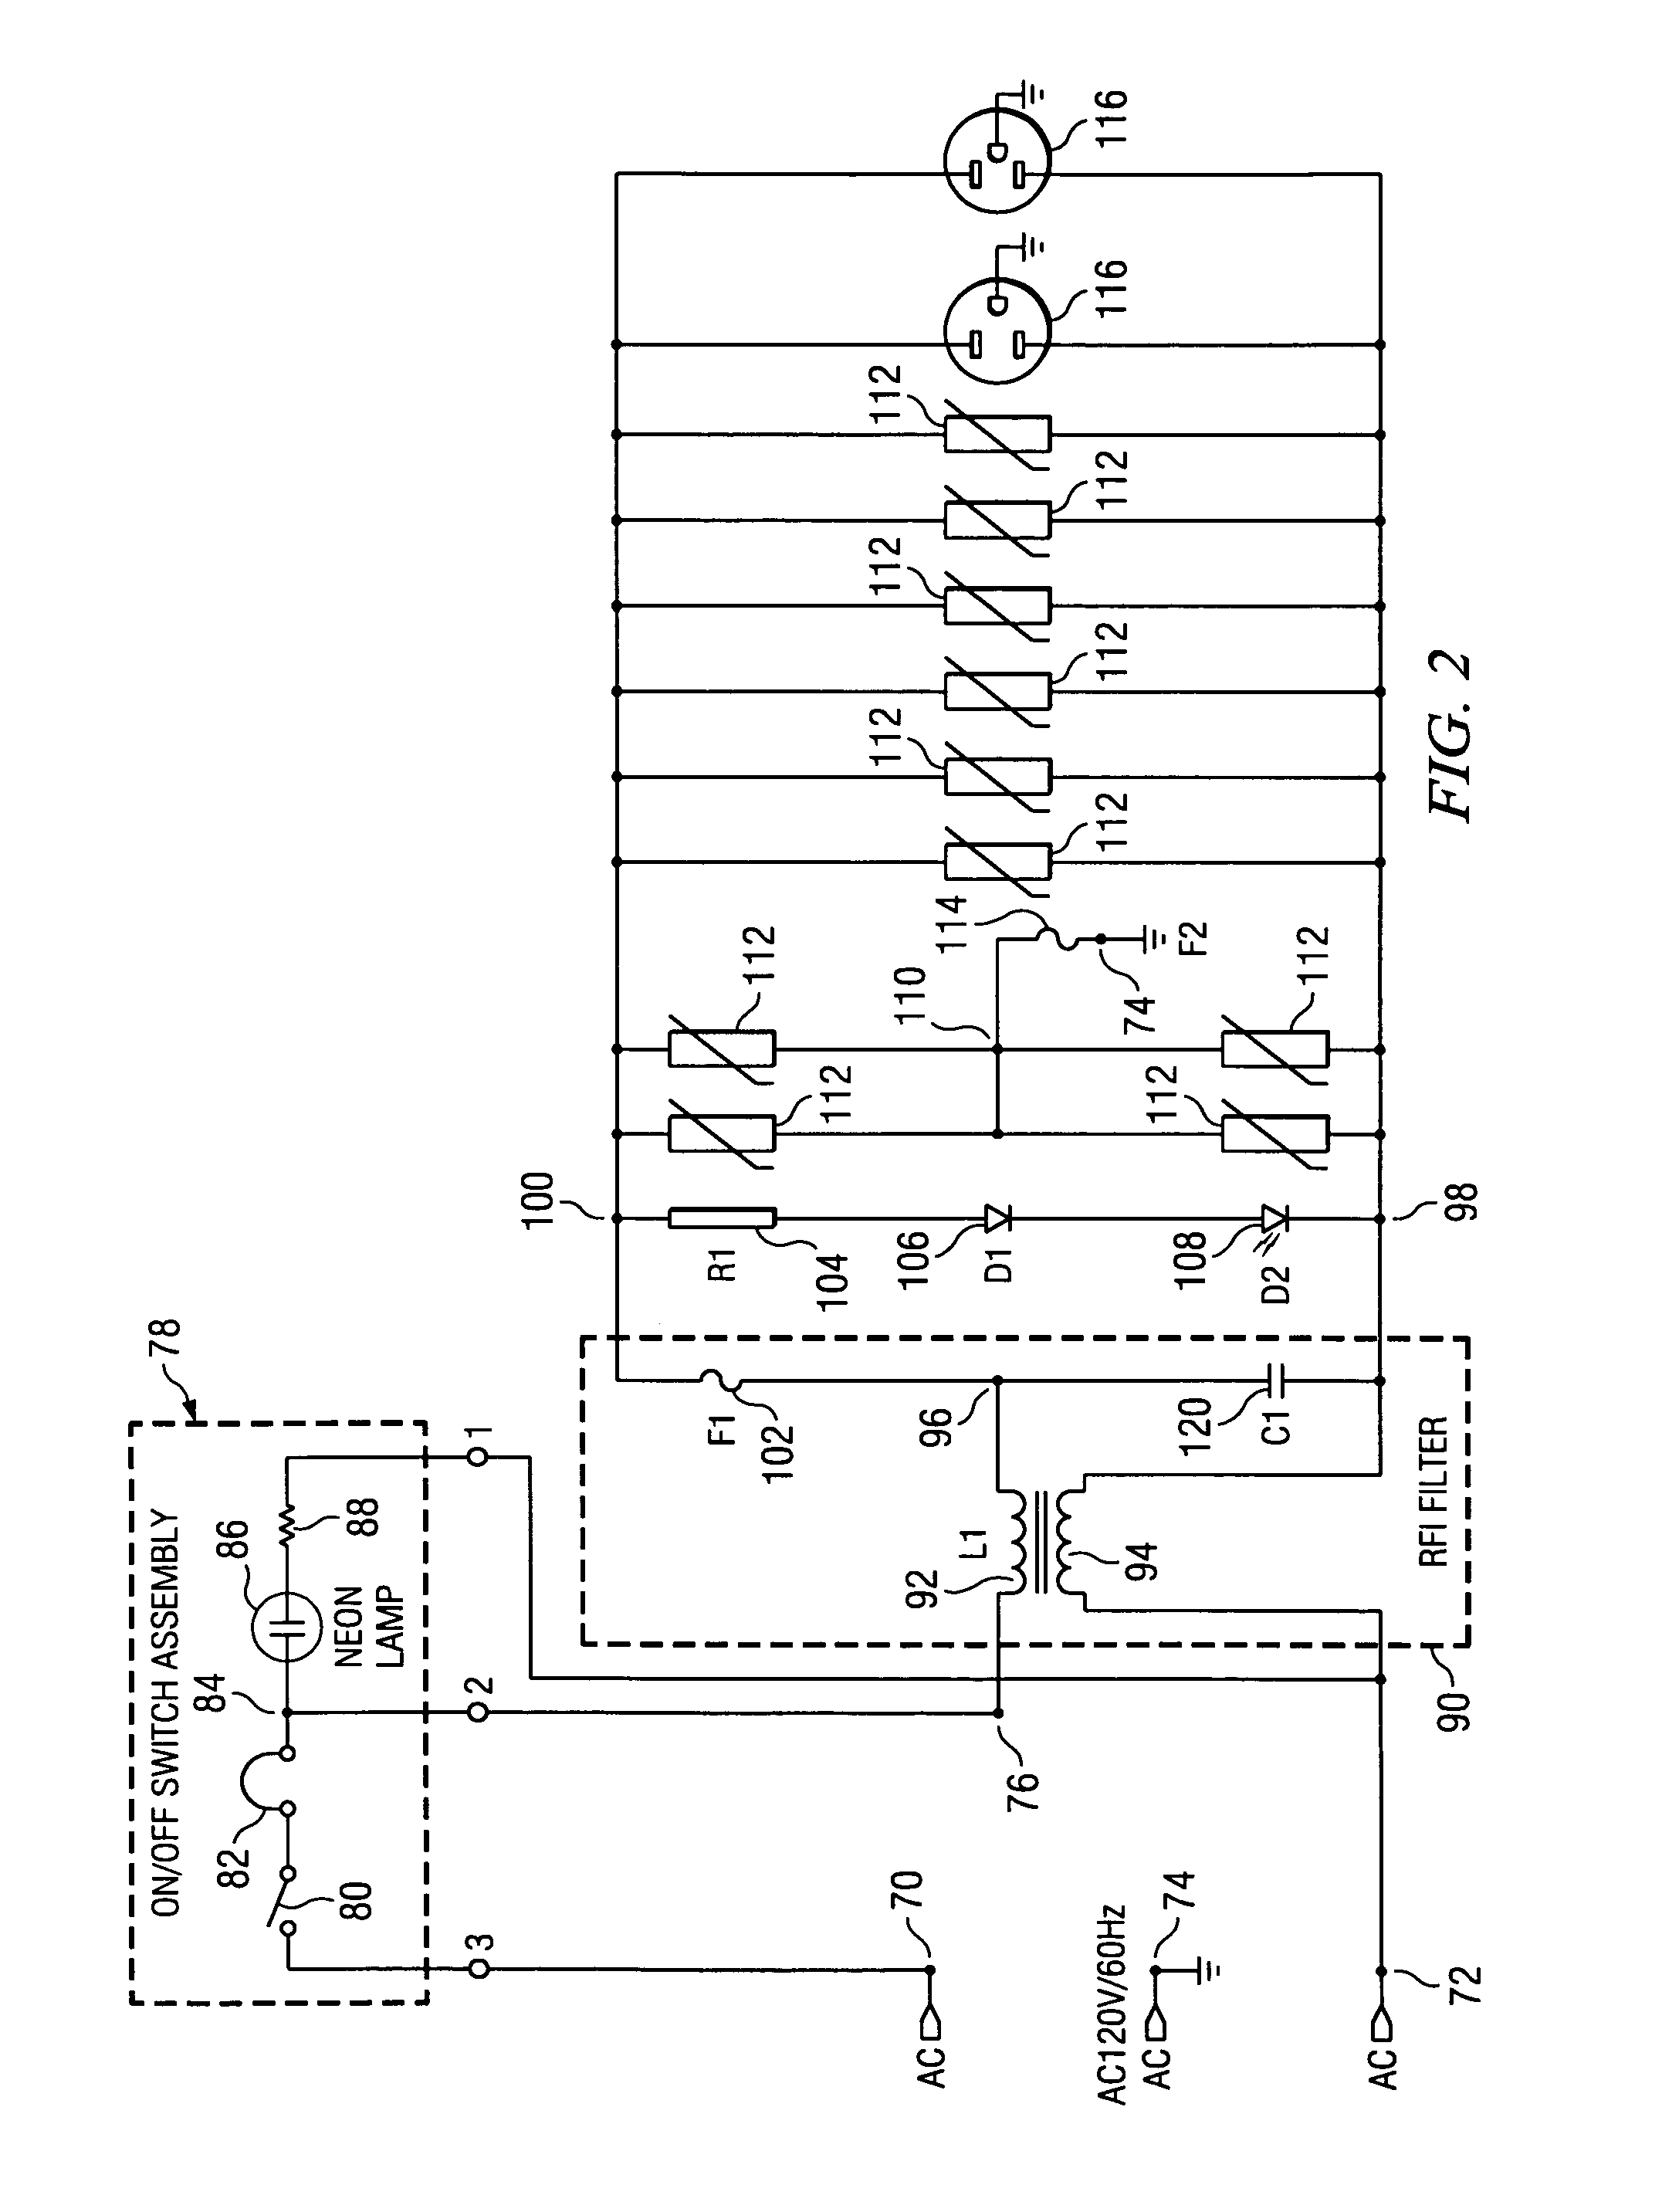 Apparatus for connecting and organizing cords and cables